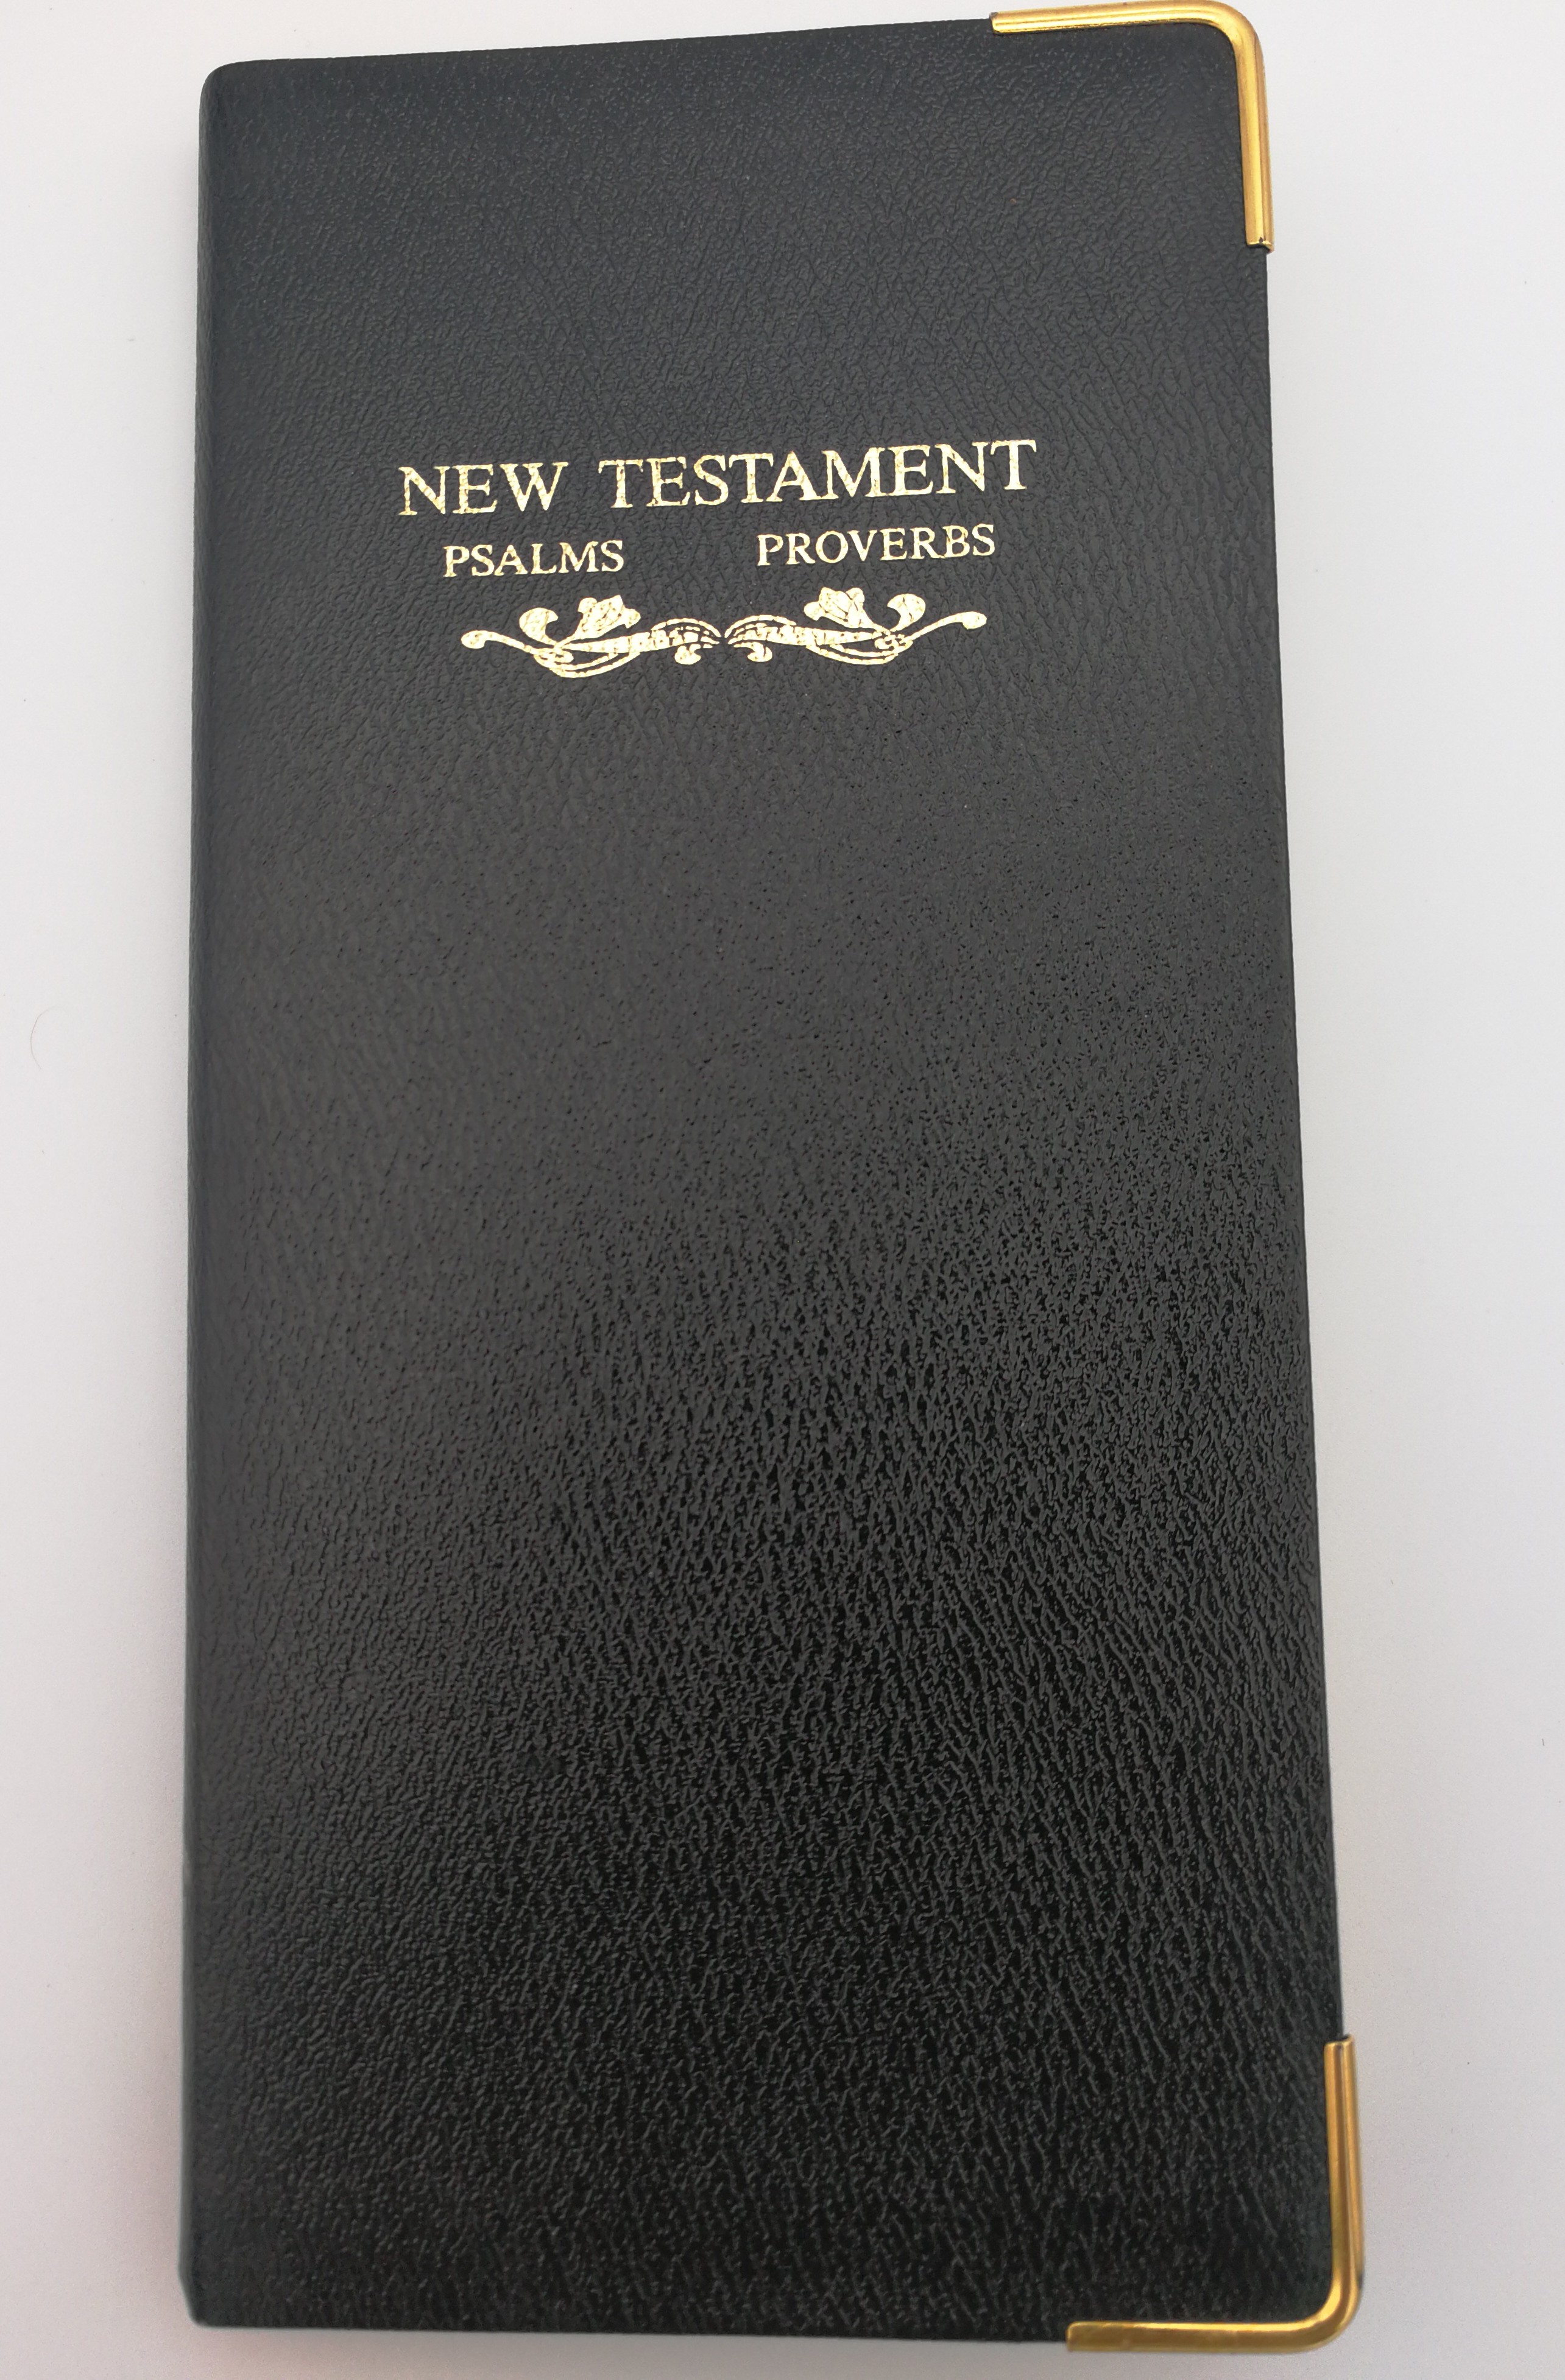 The New Testament Psalms and Proverbs 1